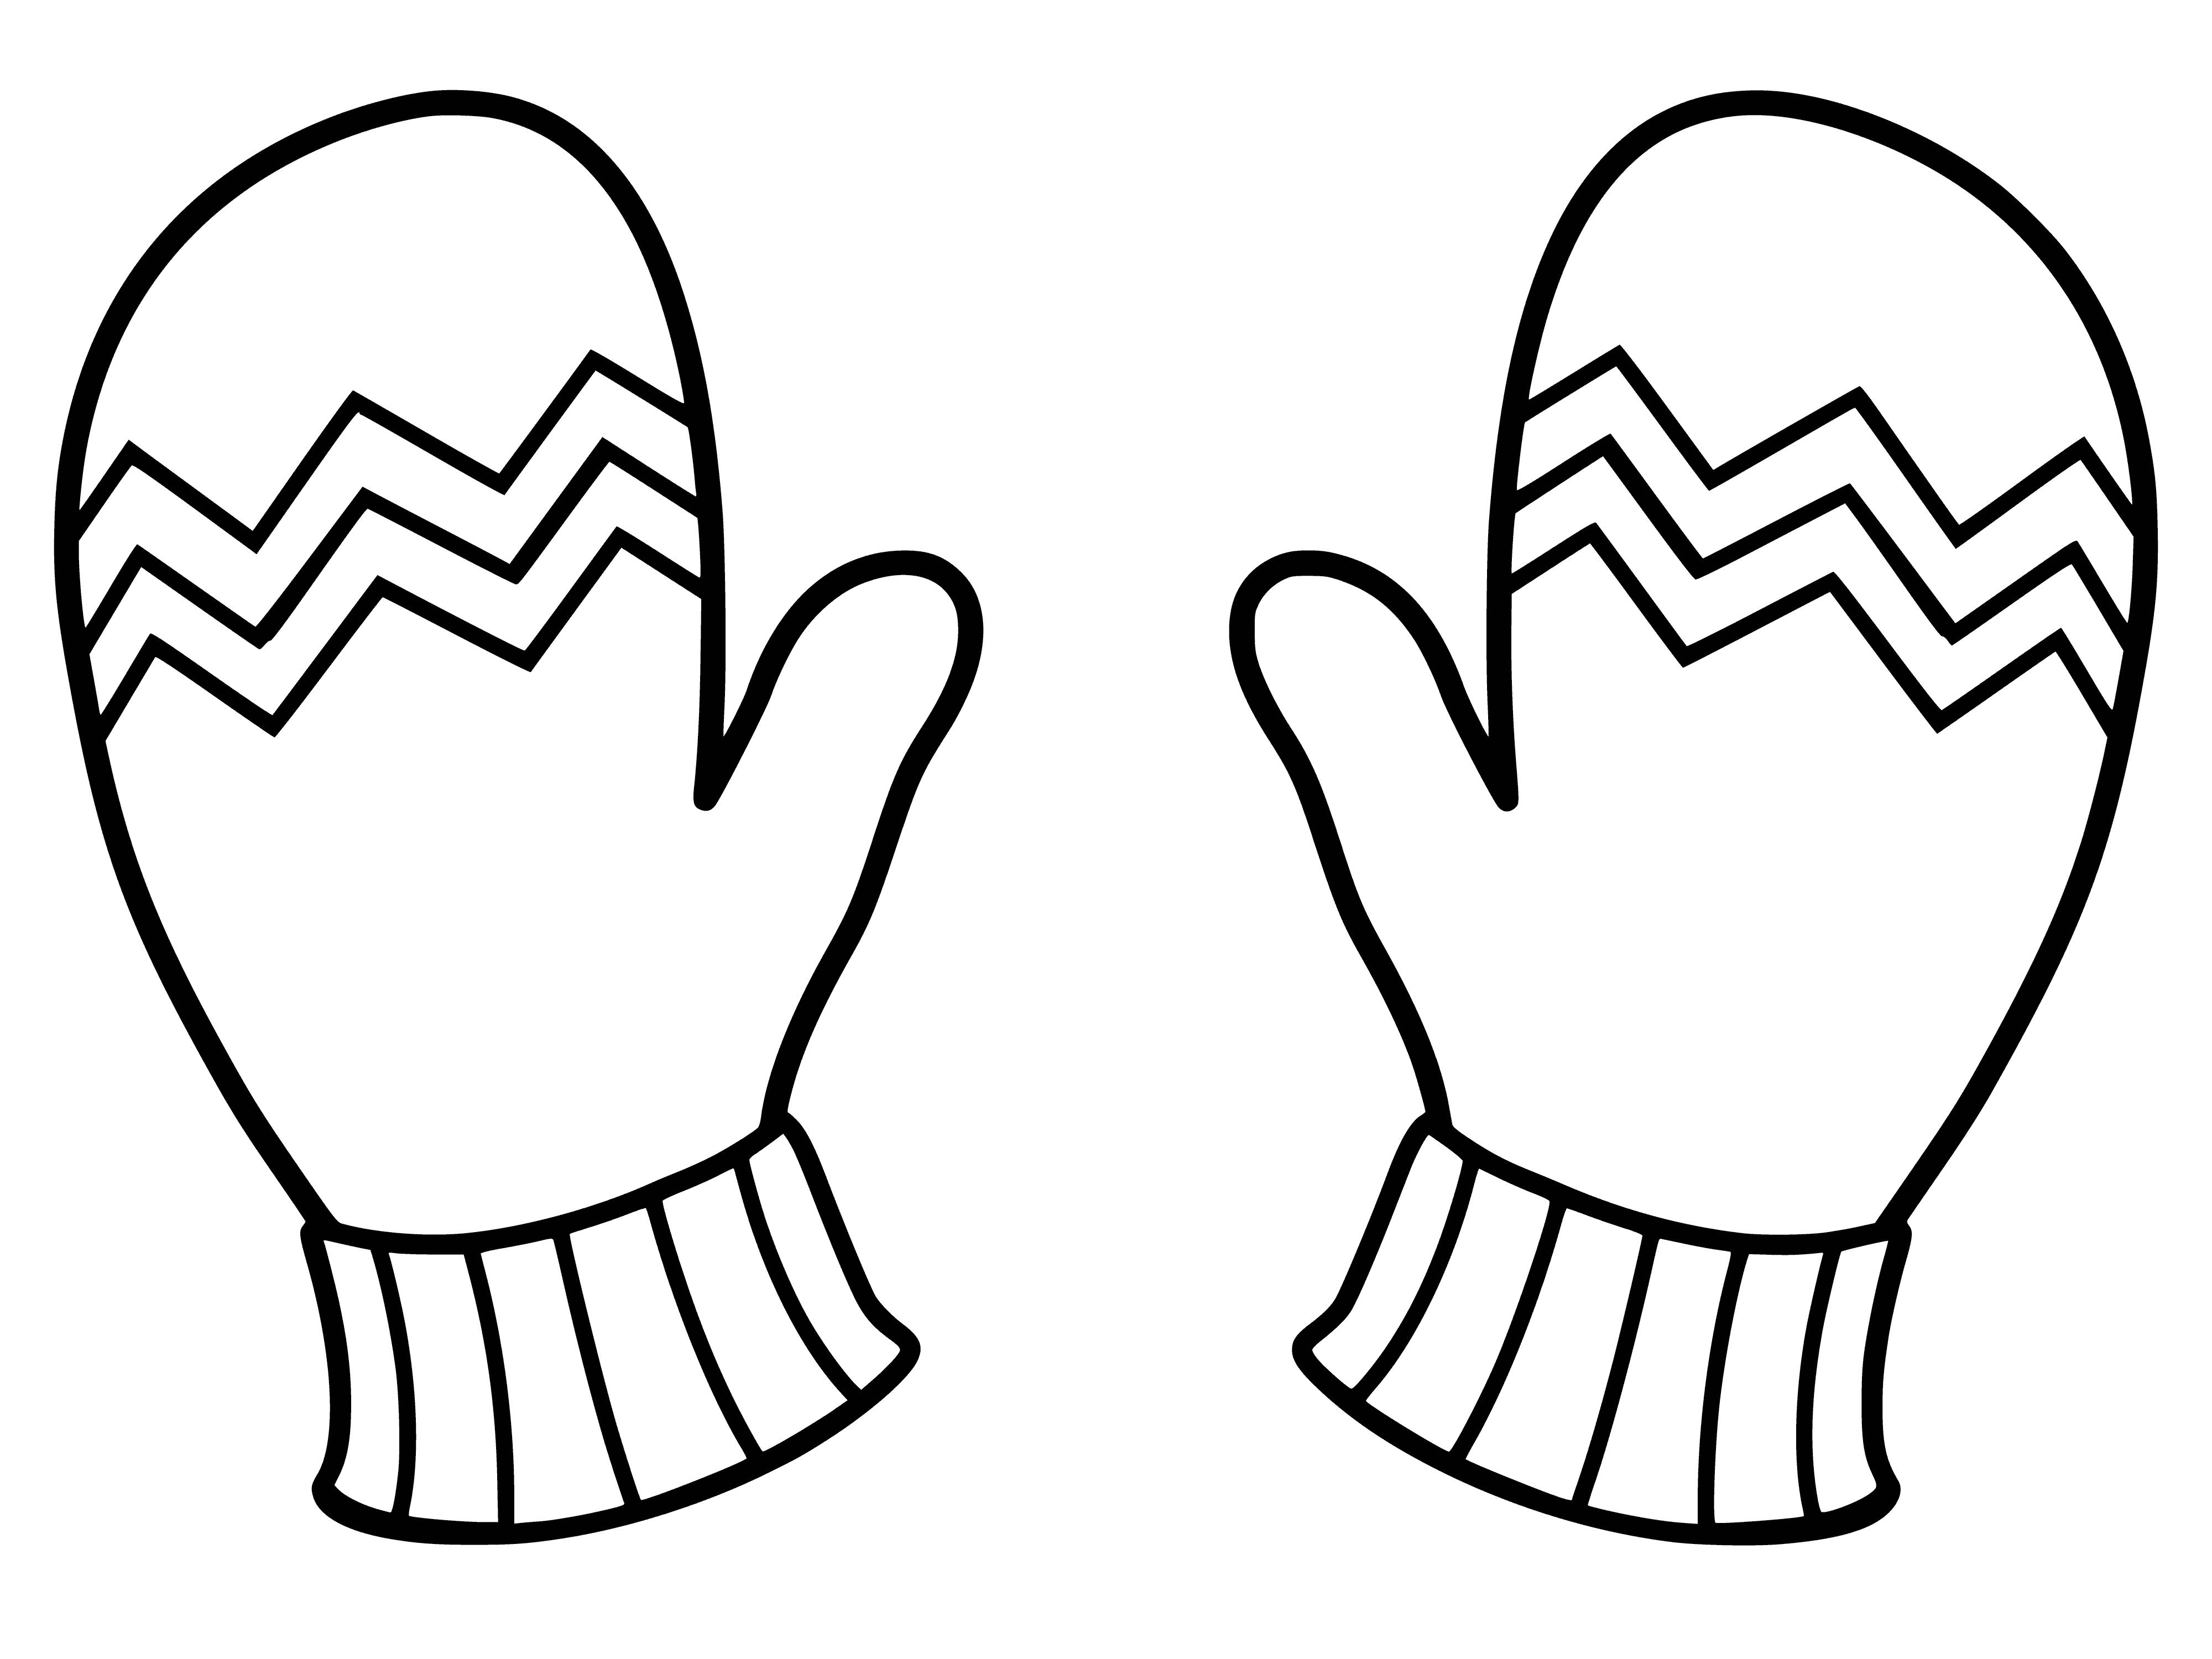 coloring page: Mittens made of cozy material - dark color, ribbed cuff to keep in place - to keep hands warm. #coloringpage